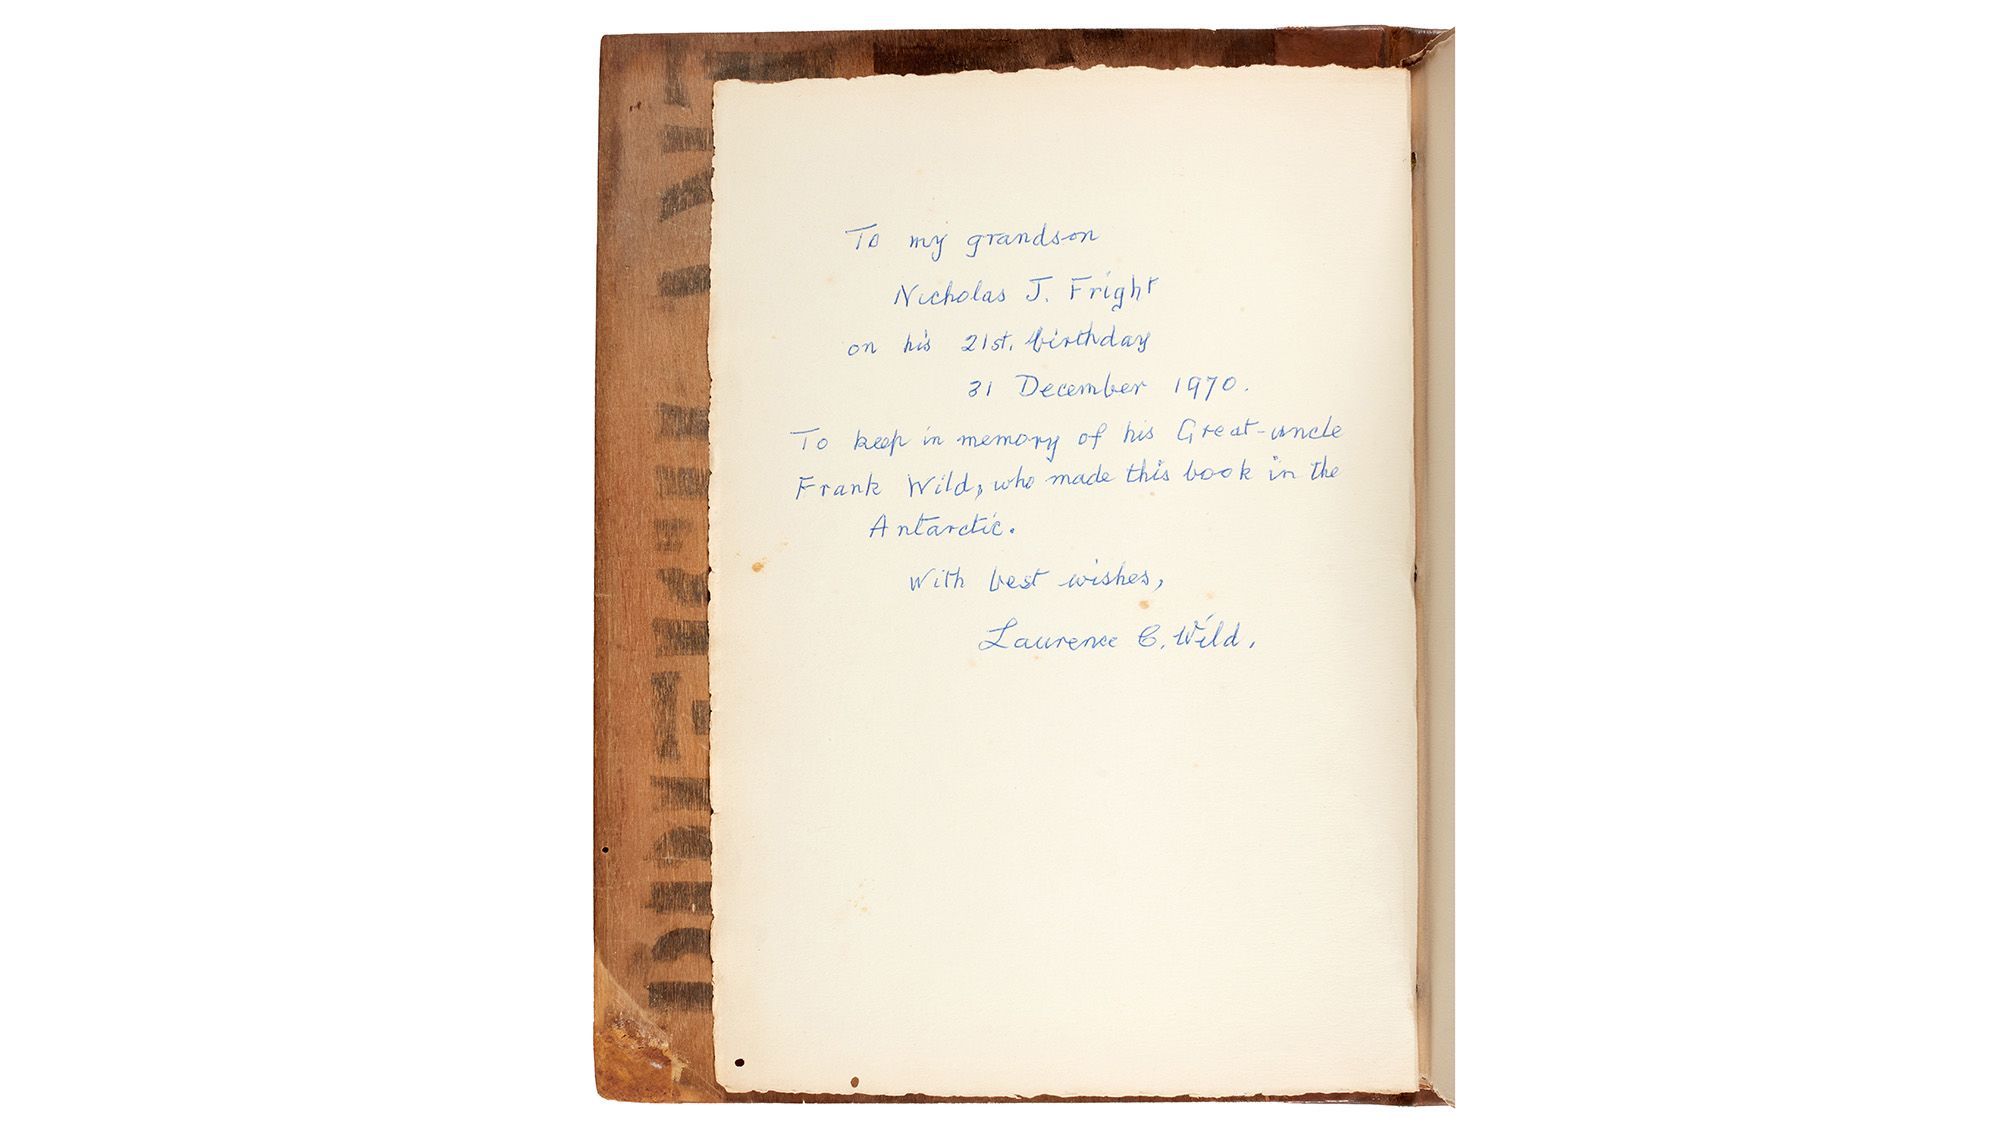 <strong>Tracing its path: </strong>This book is inscribed by Frank Wild's brother Laurence to his grandson Nicholas on his 21st birthday in December 1970: "To keep in memory of his Great-uncle Frank Wild, who made this book in the Antarctic..."